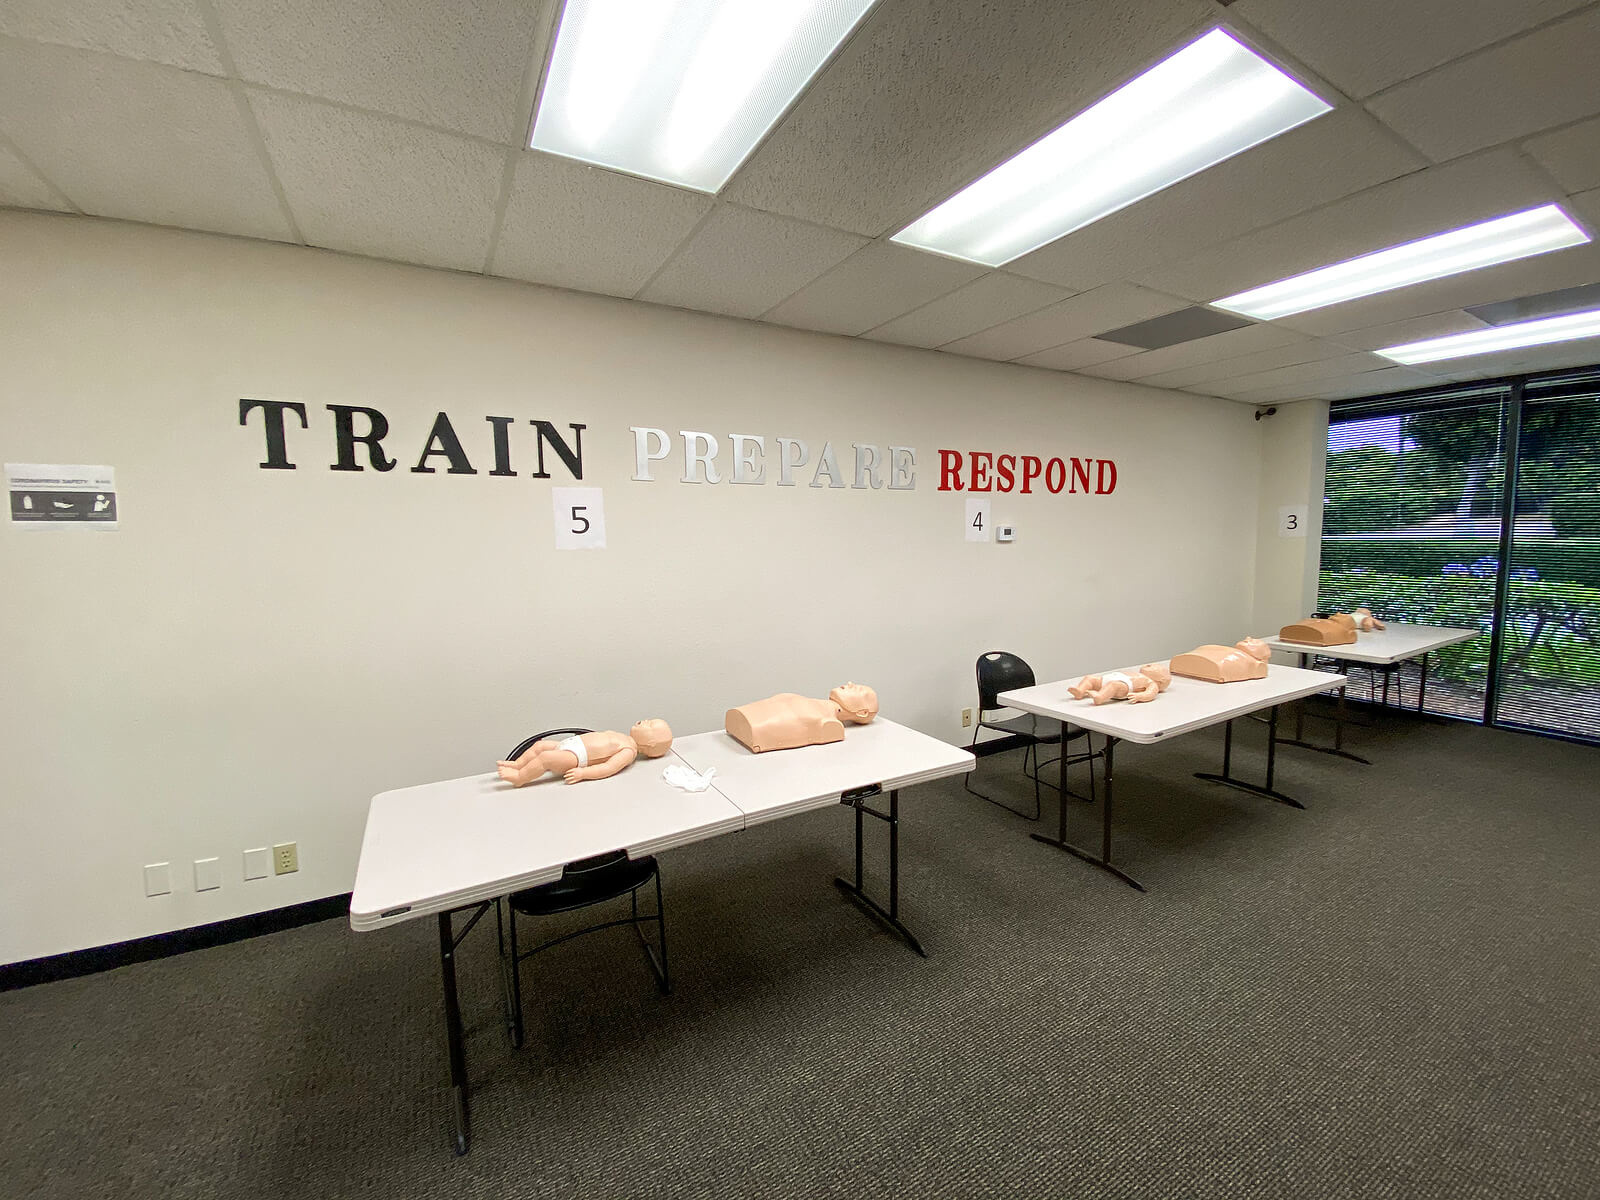 First Aid training room with two tables and CPR dummies.